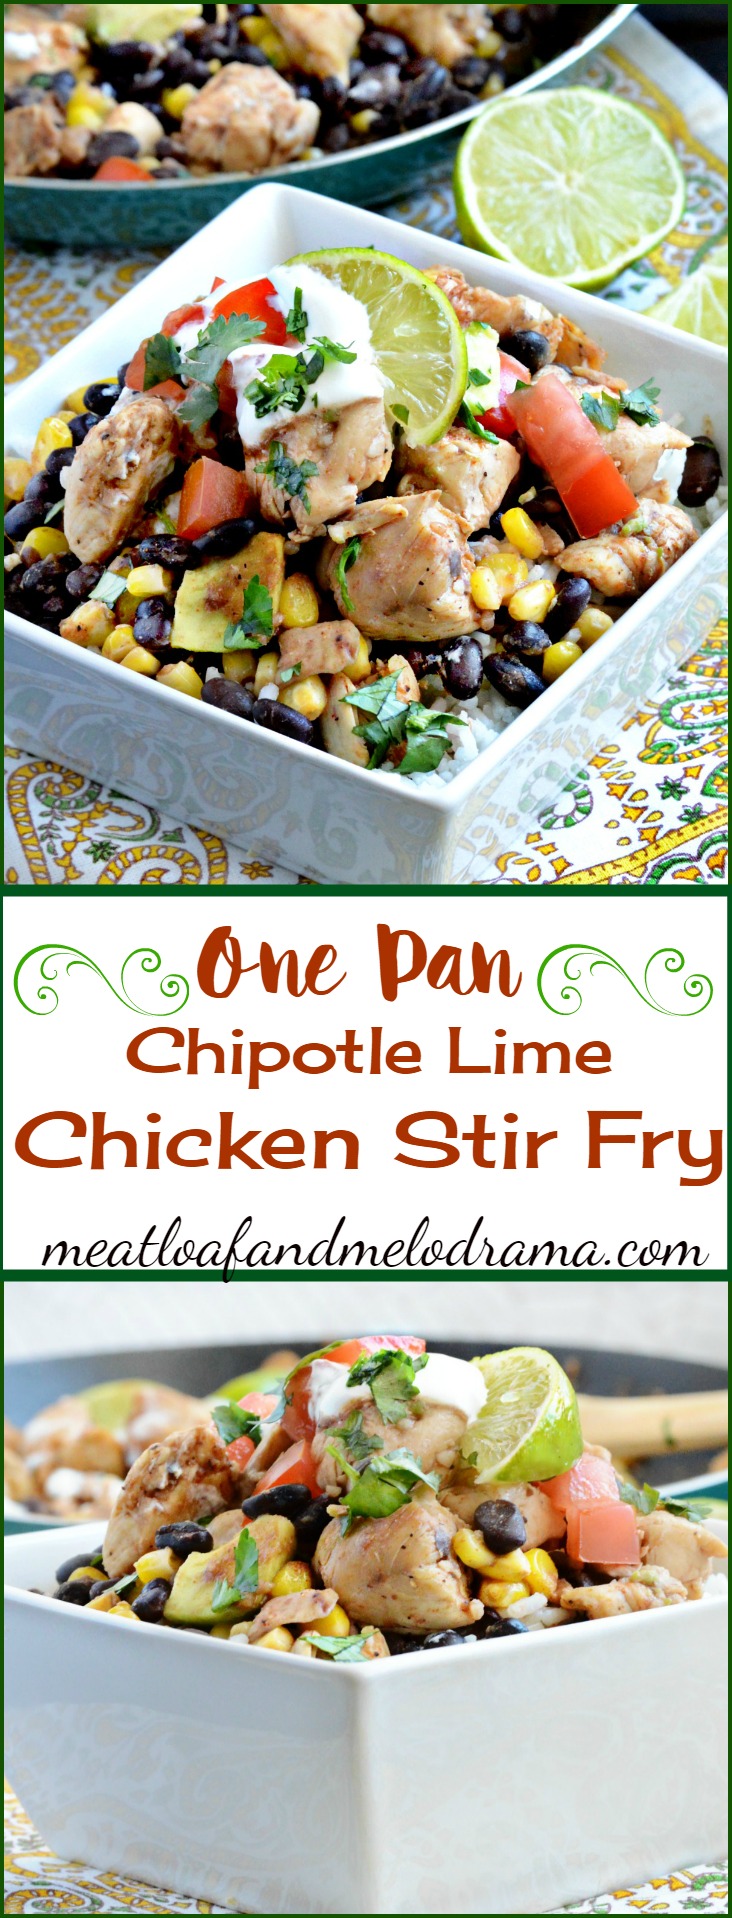 One Pan Chipotle Lime Chicken Stir Fry Dinner Recipe